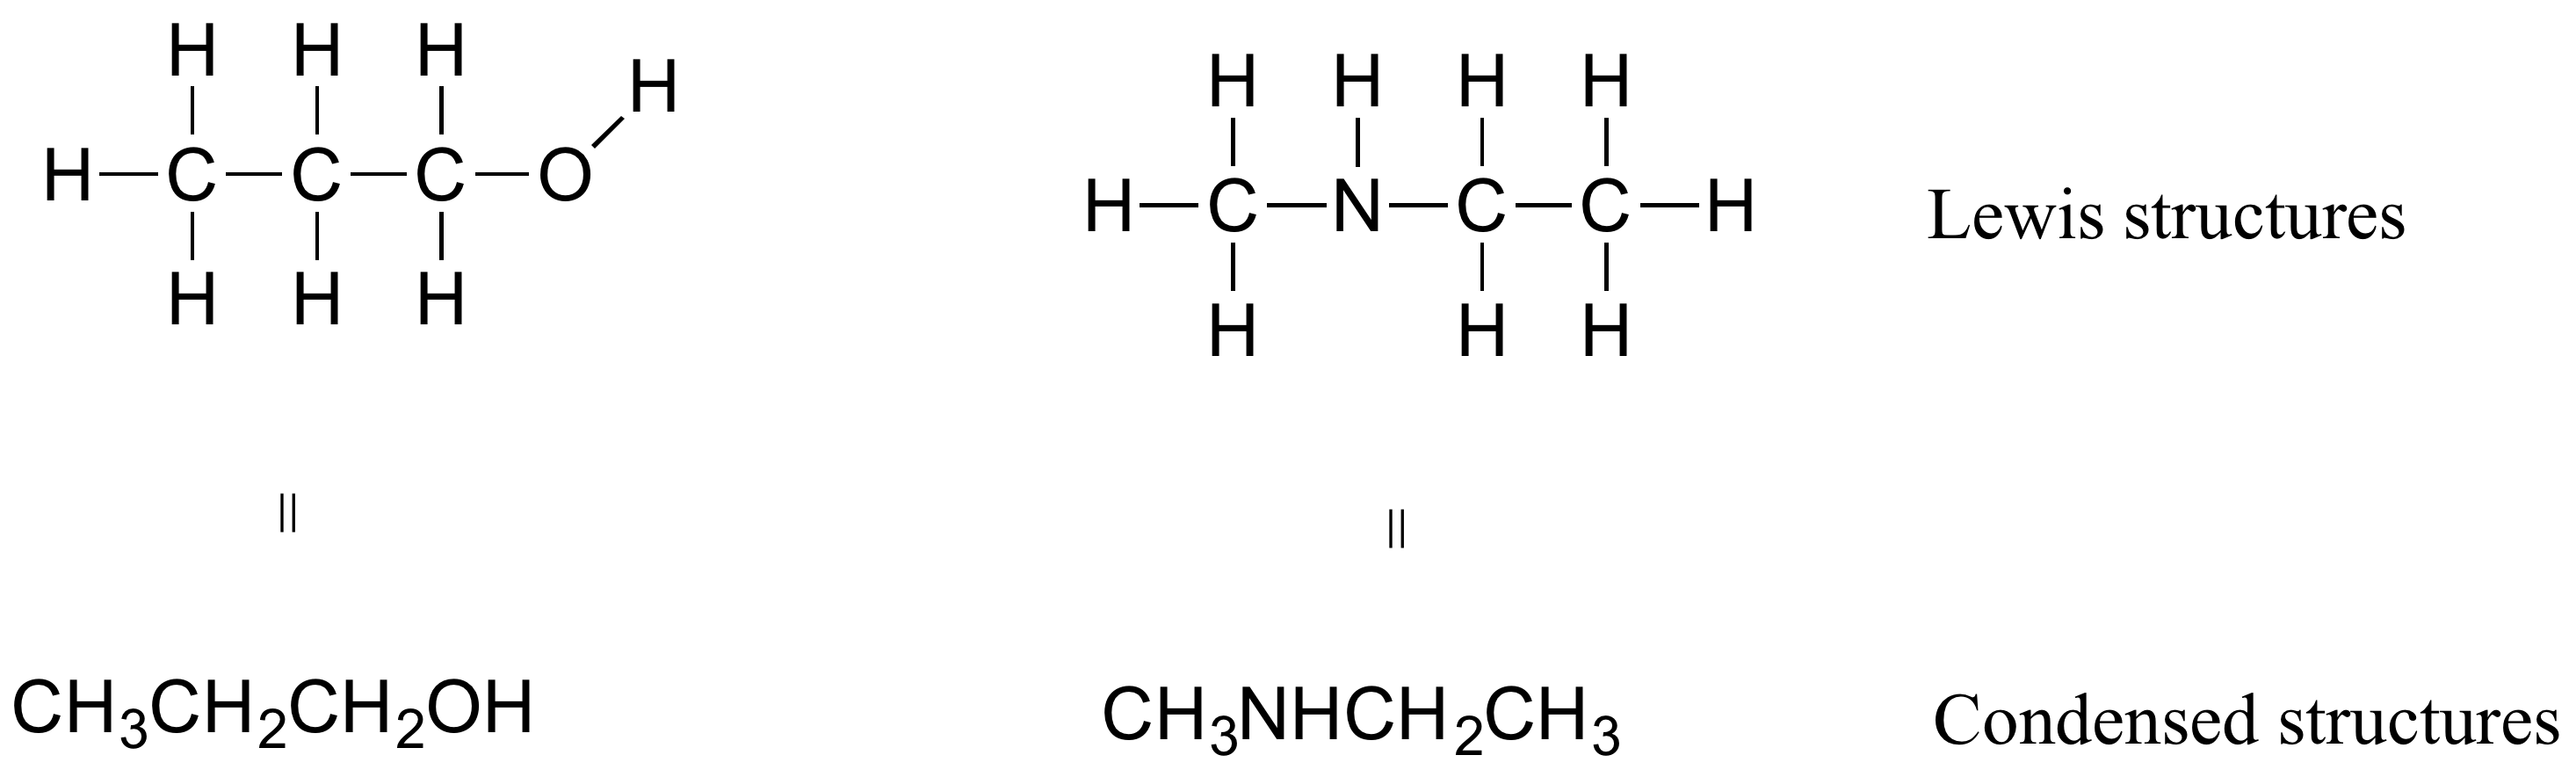 Ethane Condensed Structural Formula